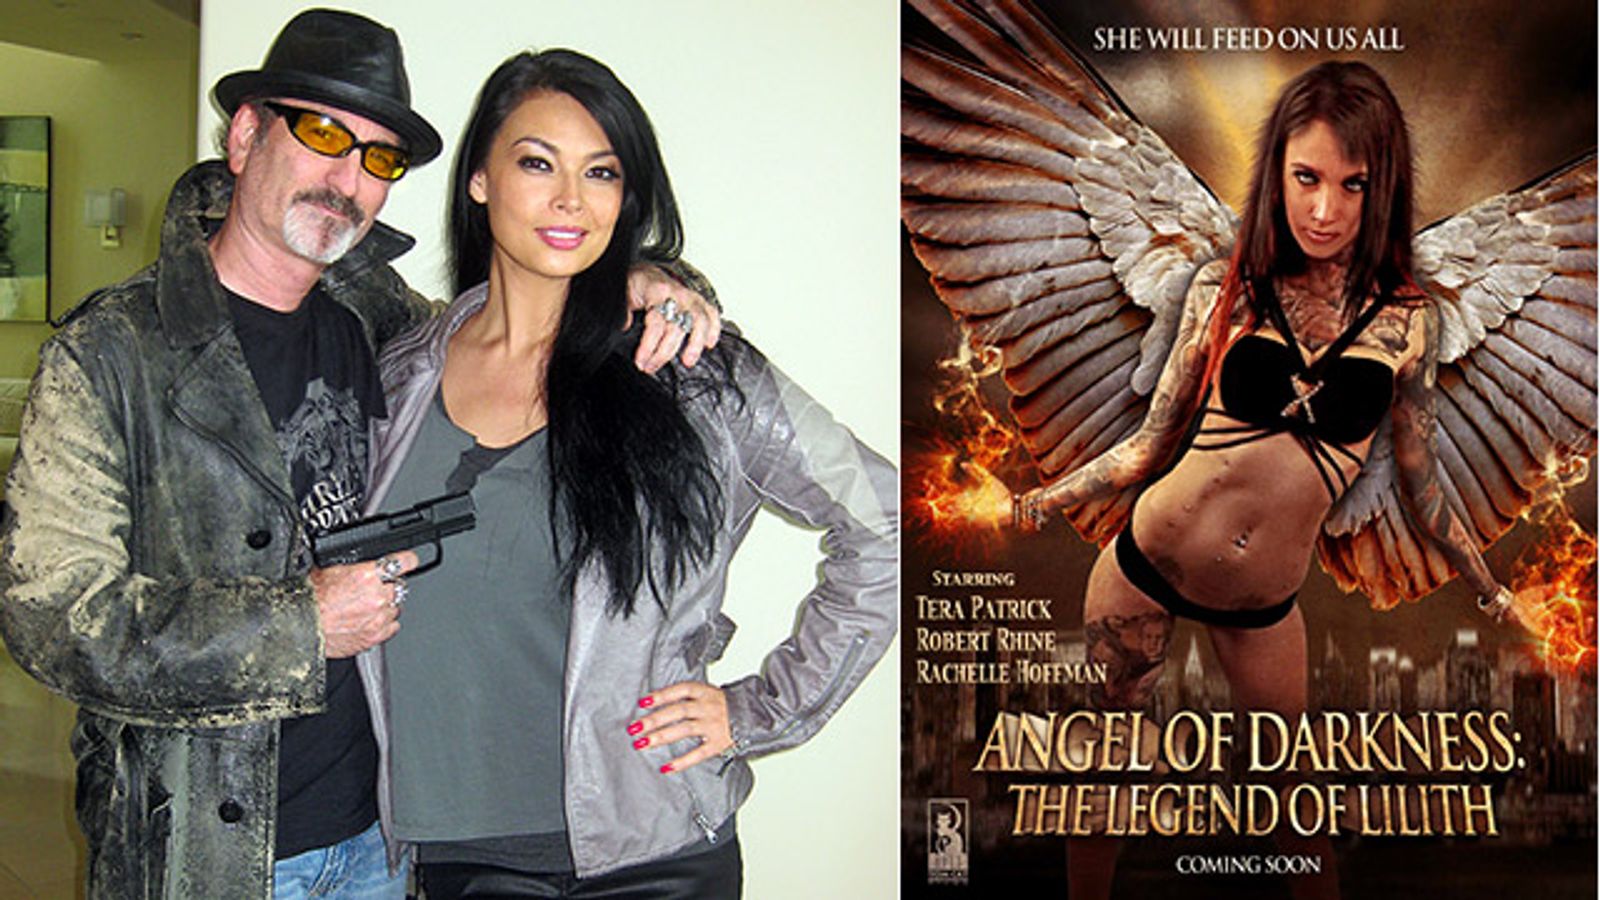 Tera Patrick Stars In 'Angel Of Darkness: The Legend Of Lilith'